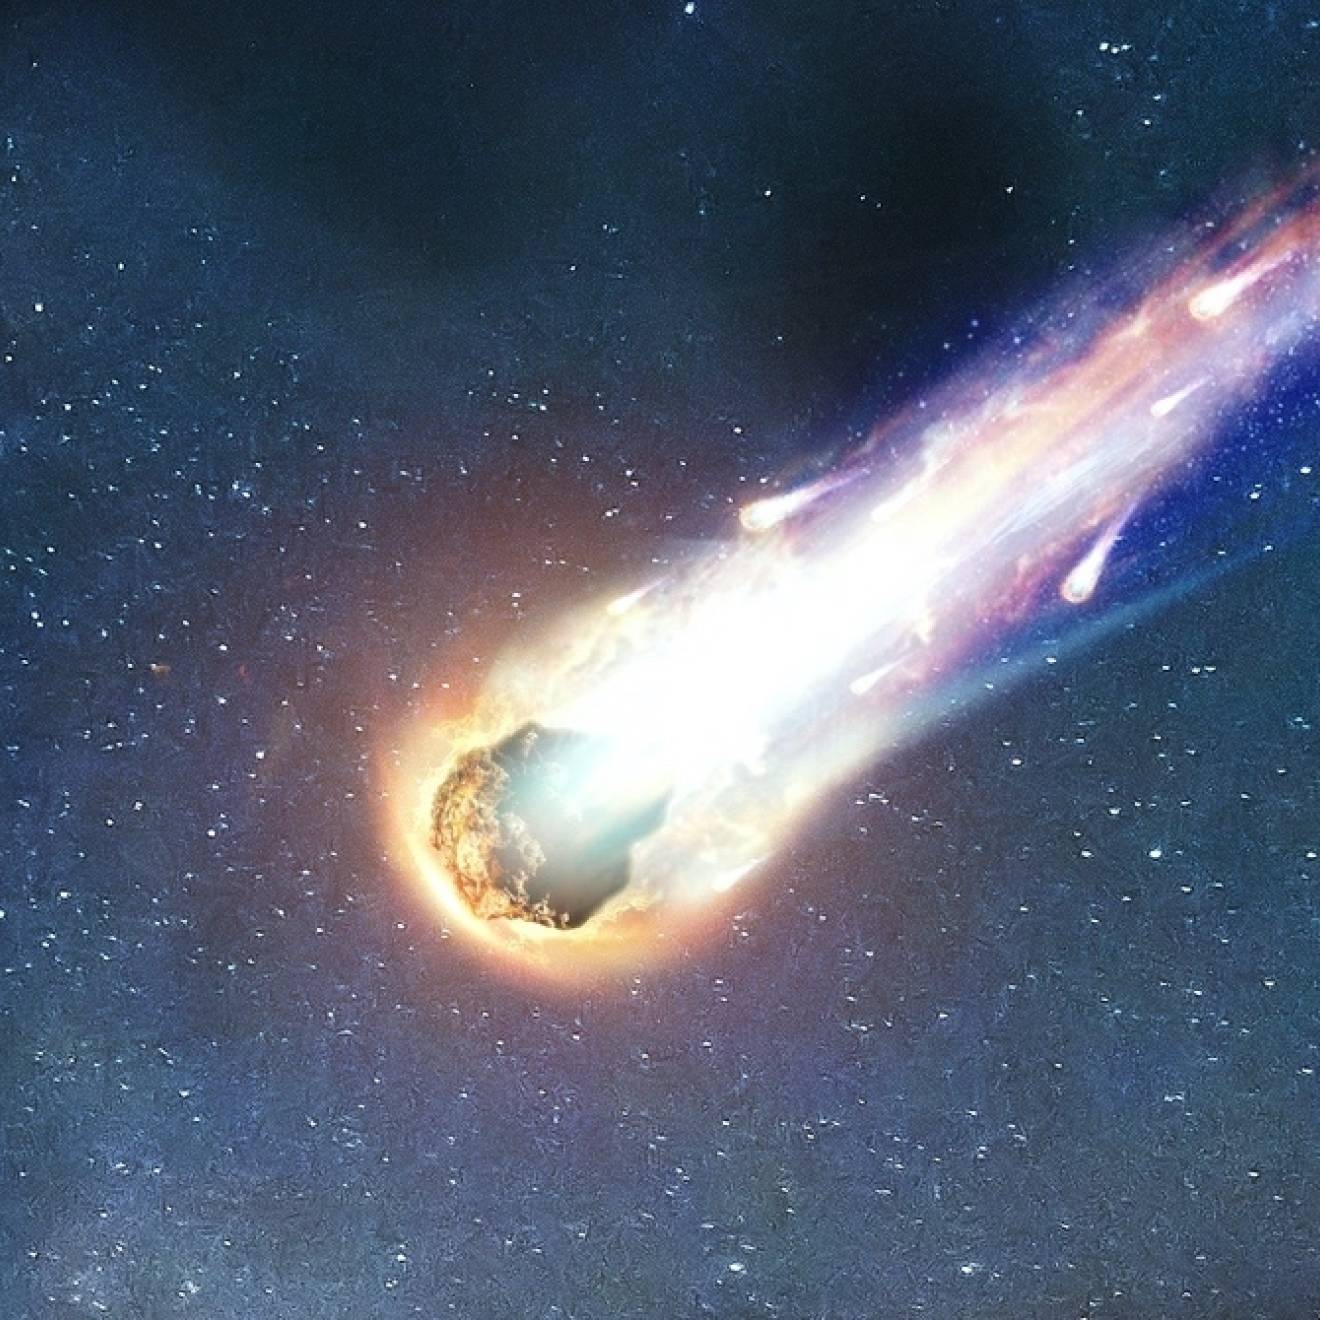 Realistic illustration of a comet with a colorful tail streaking through space, tailed by 2 smaller asteroids